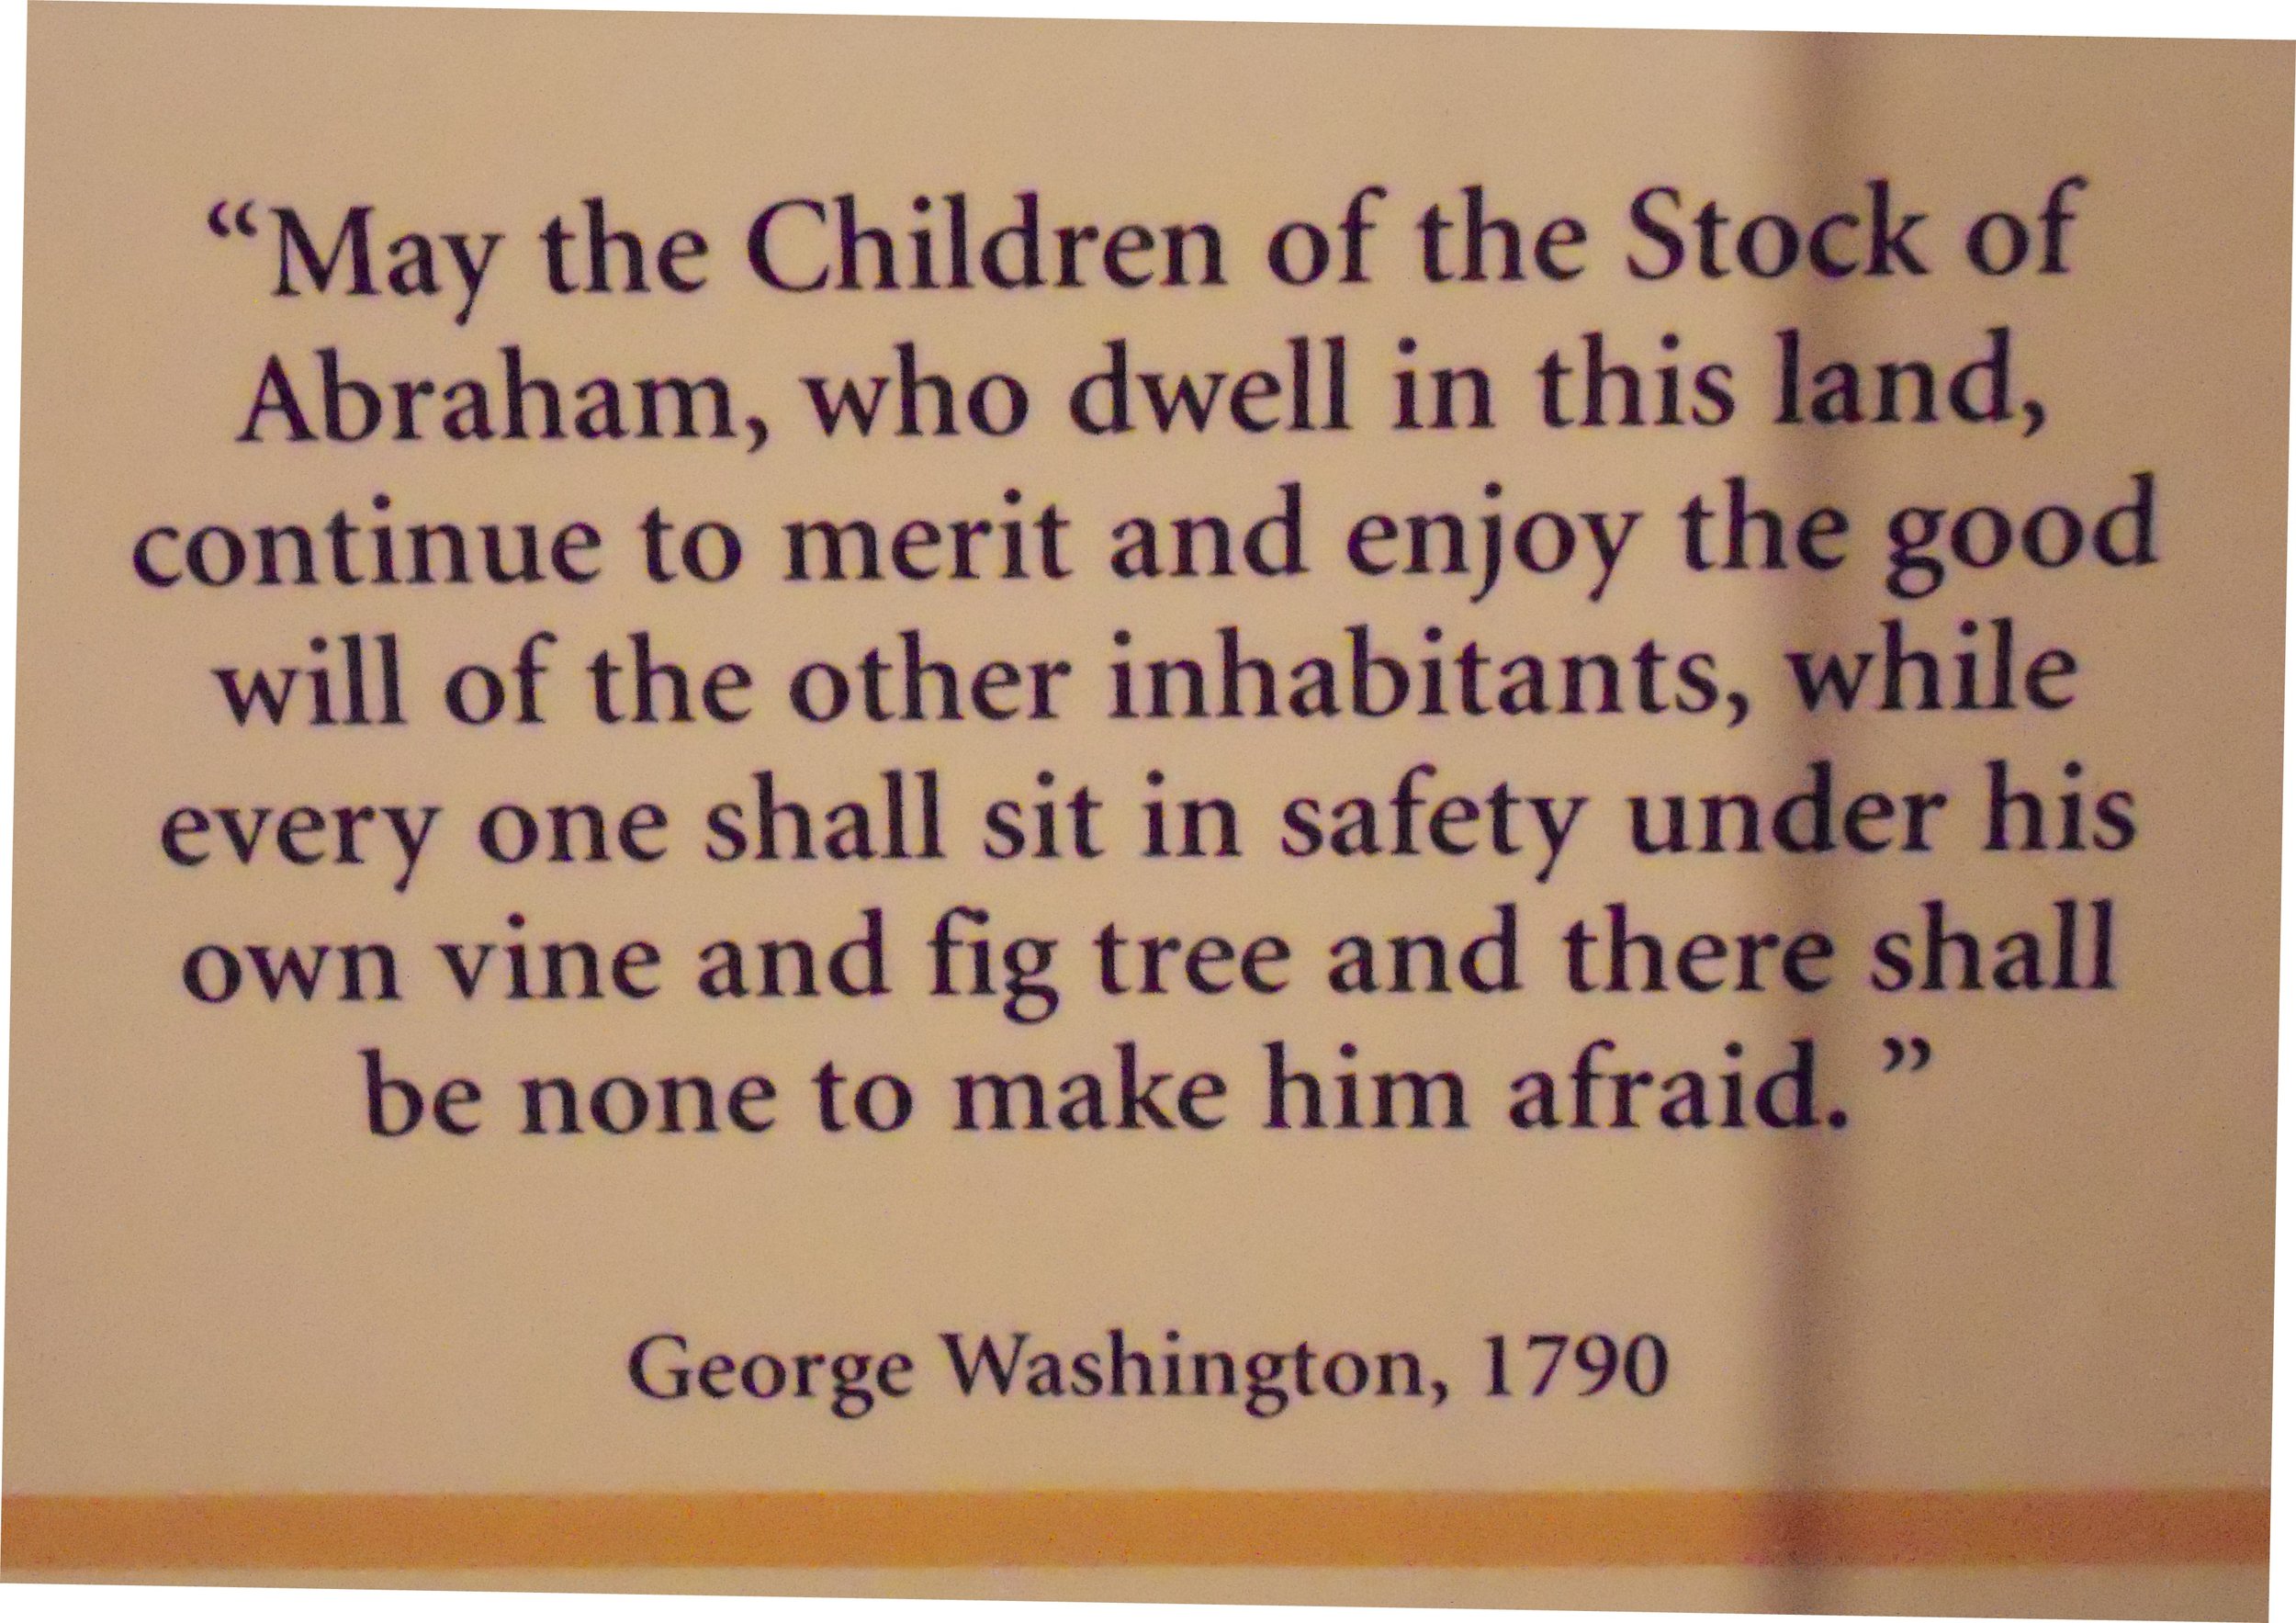  Words of wisdom about interfaith relations from one of the Founding Fathers 